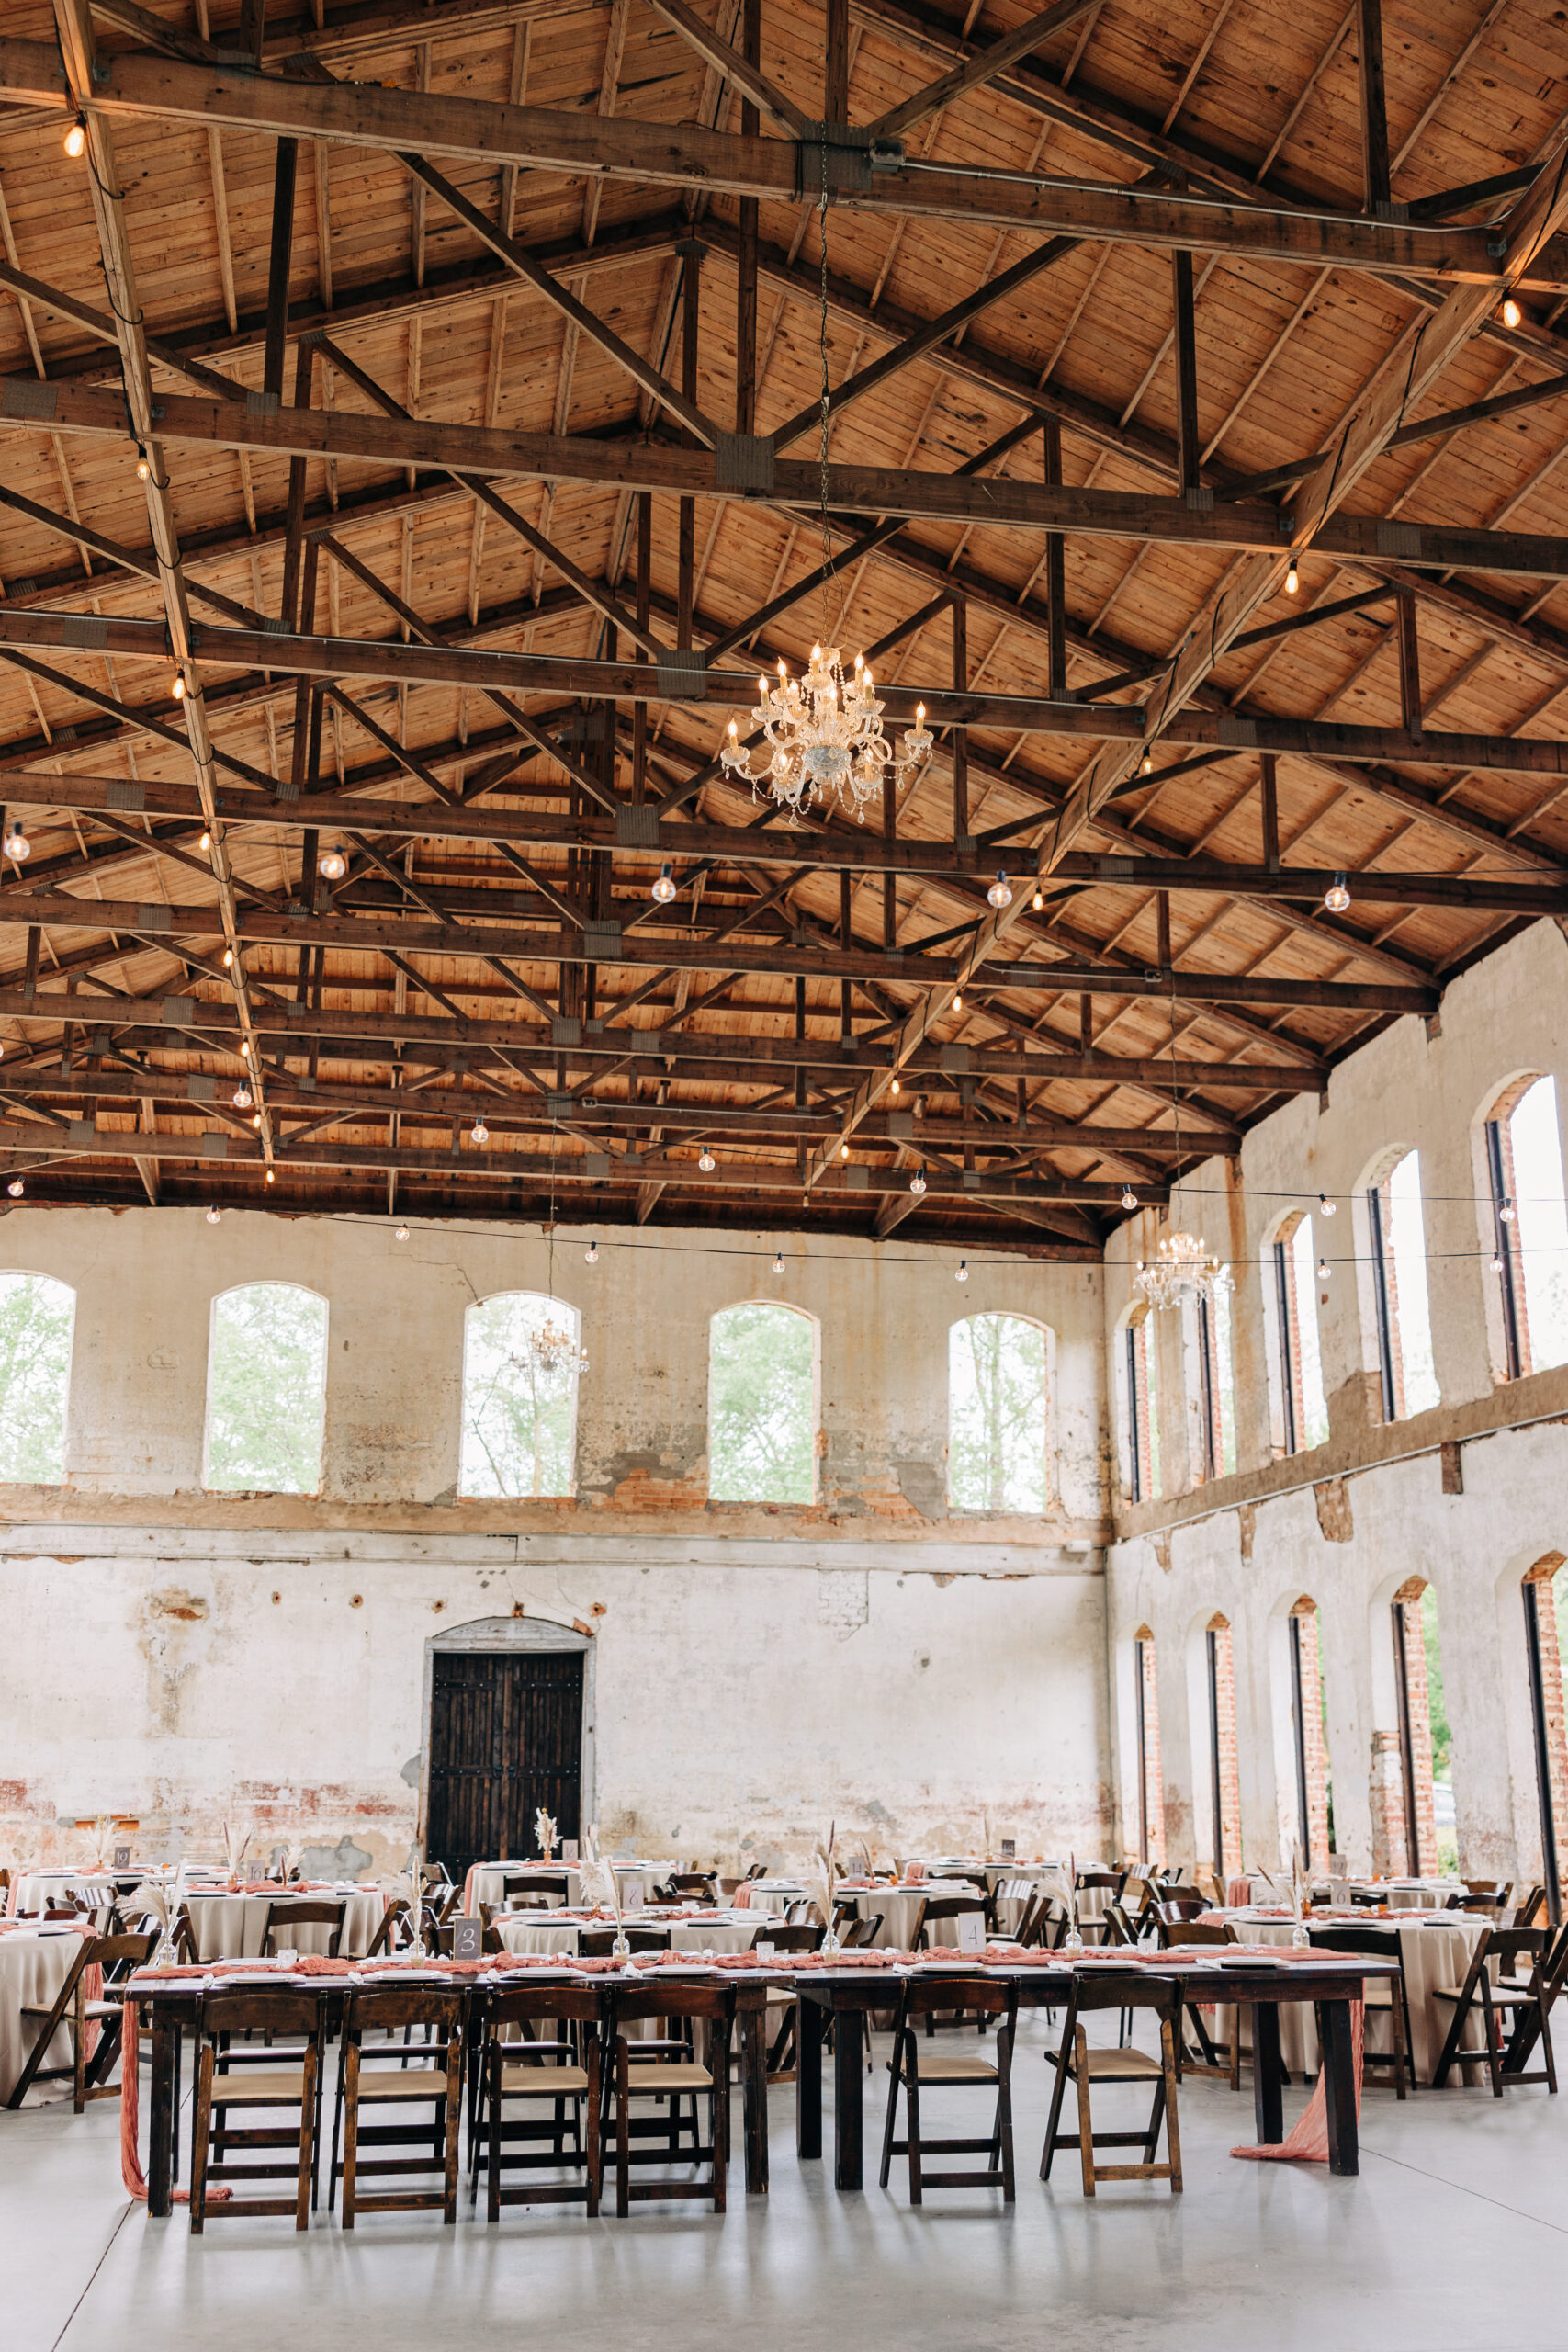 A view of a Providence Cotton Mill wedding reception set up with wooden chairs